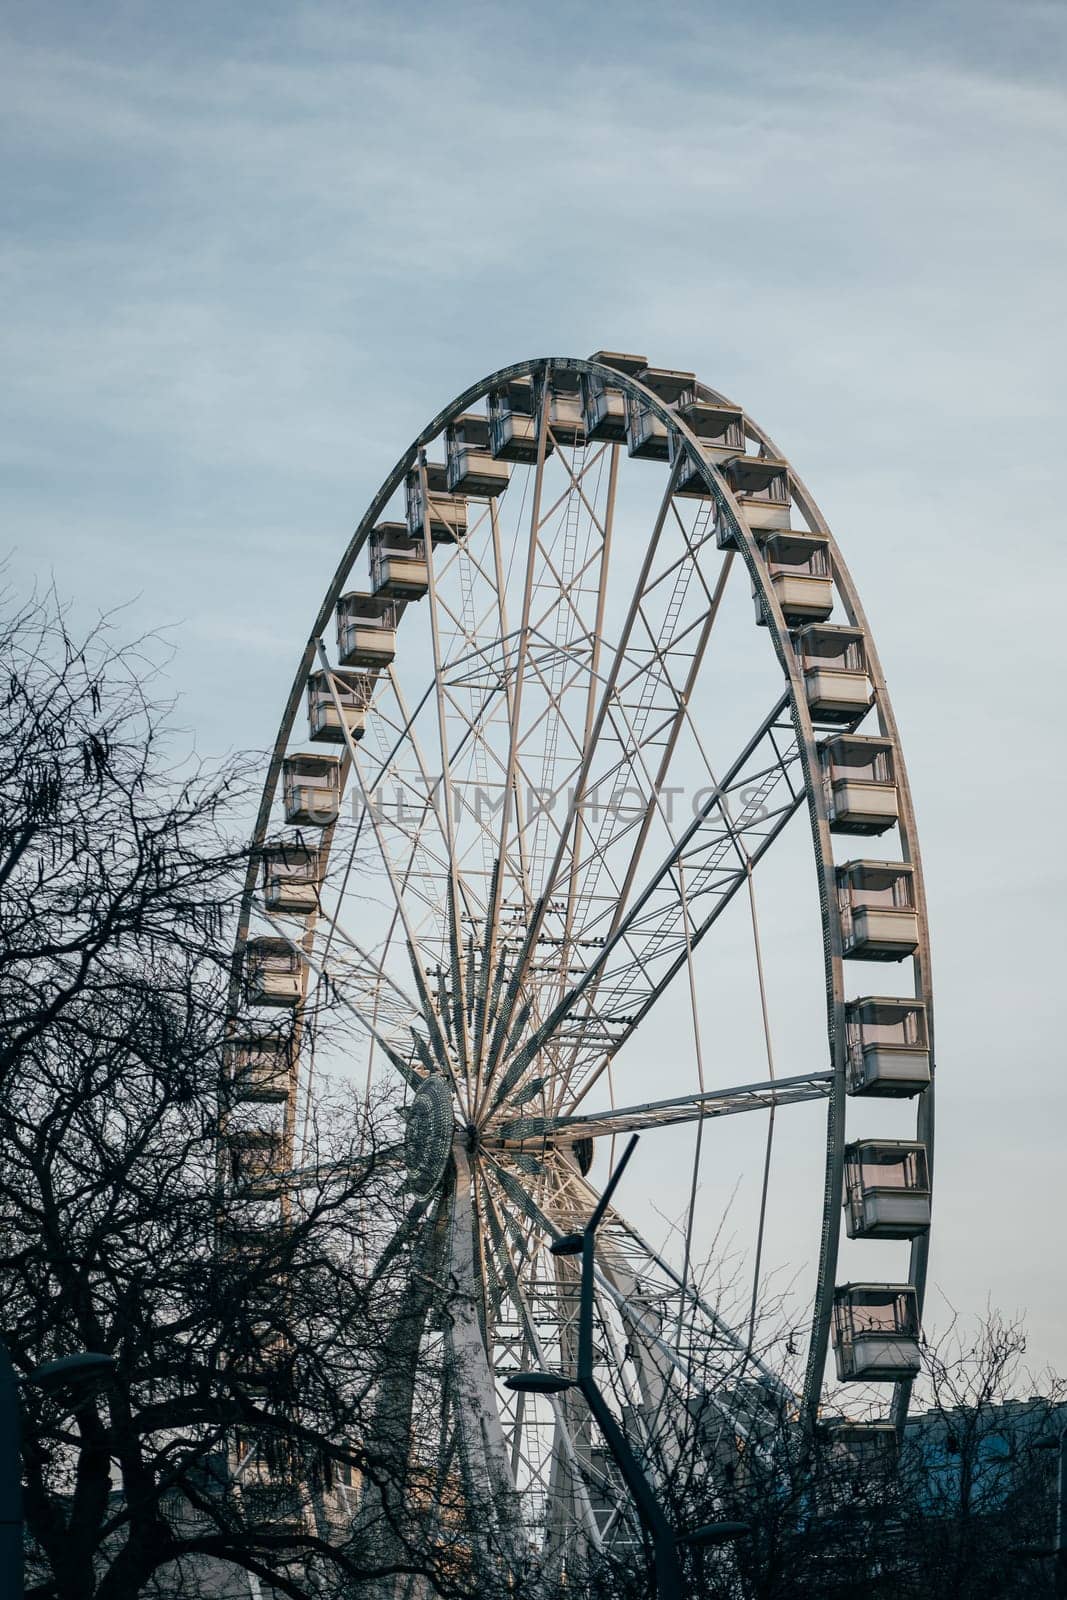 Enjoy a thrilling ride on the iconic ferris wheel among trees and the blue sky at the amusement park by apavlin